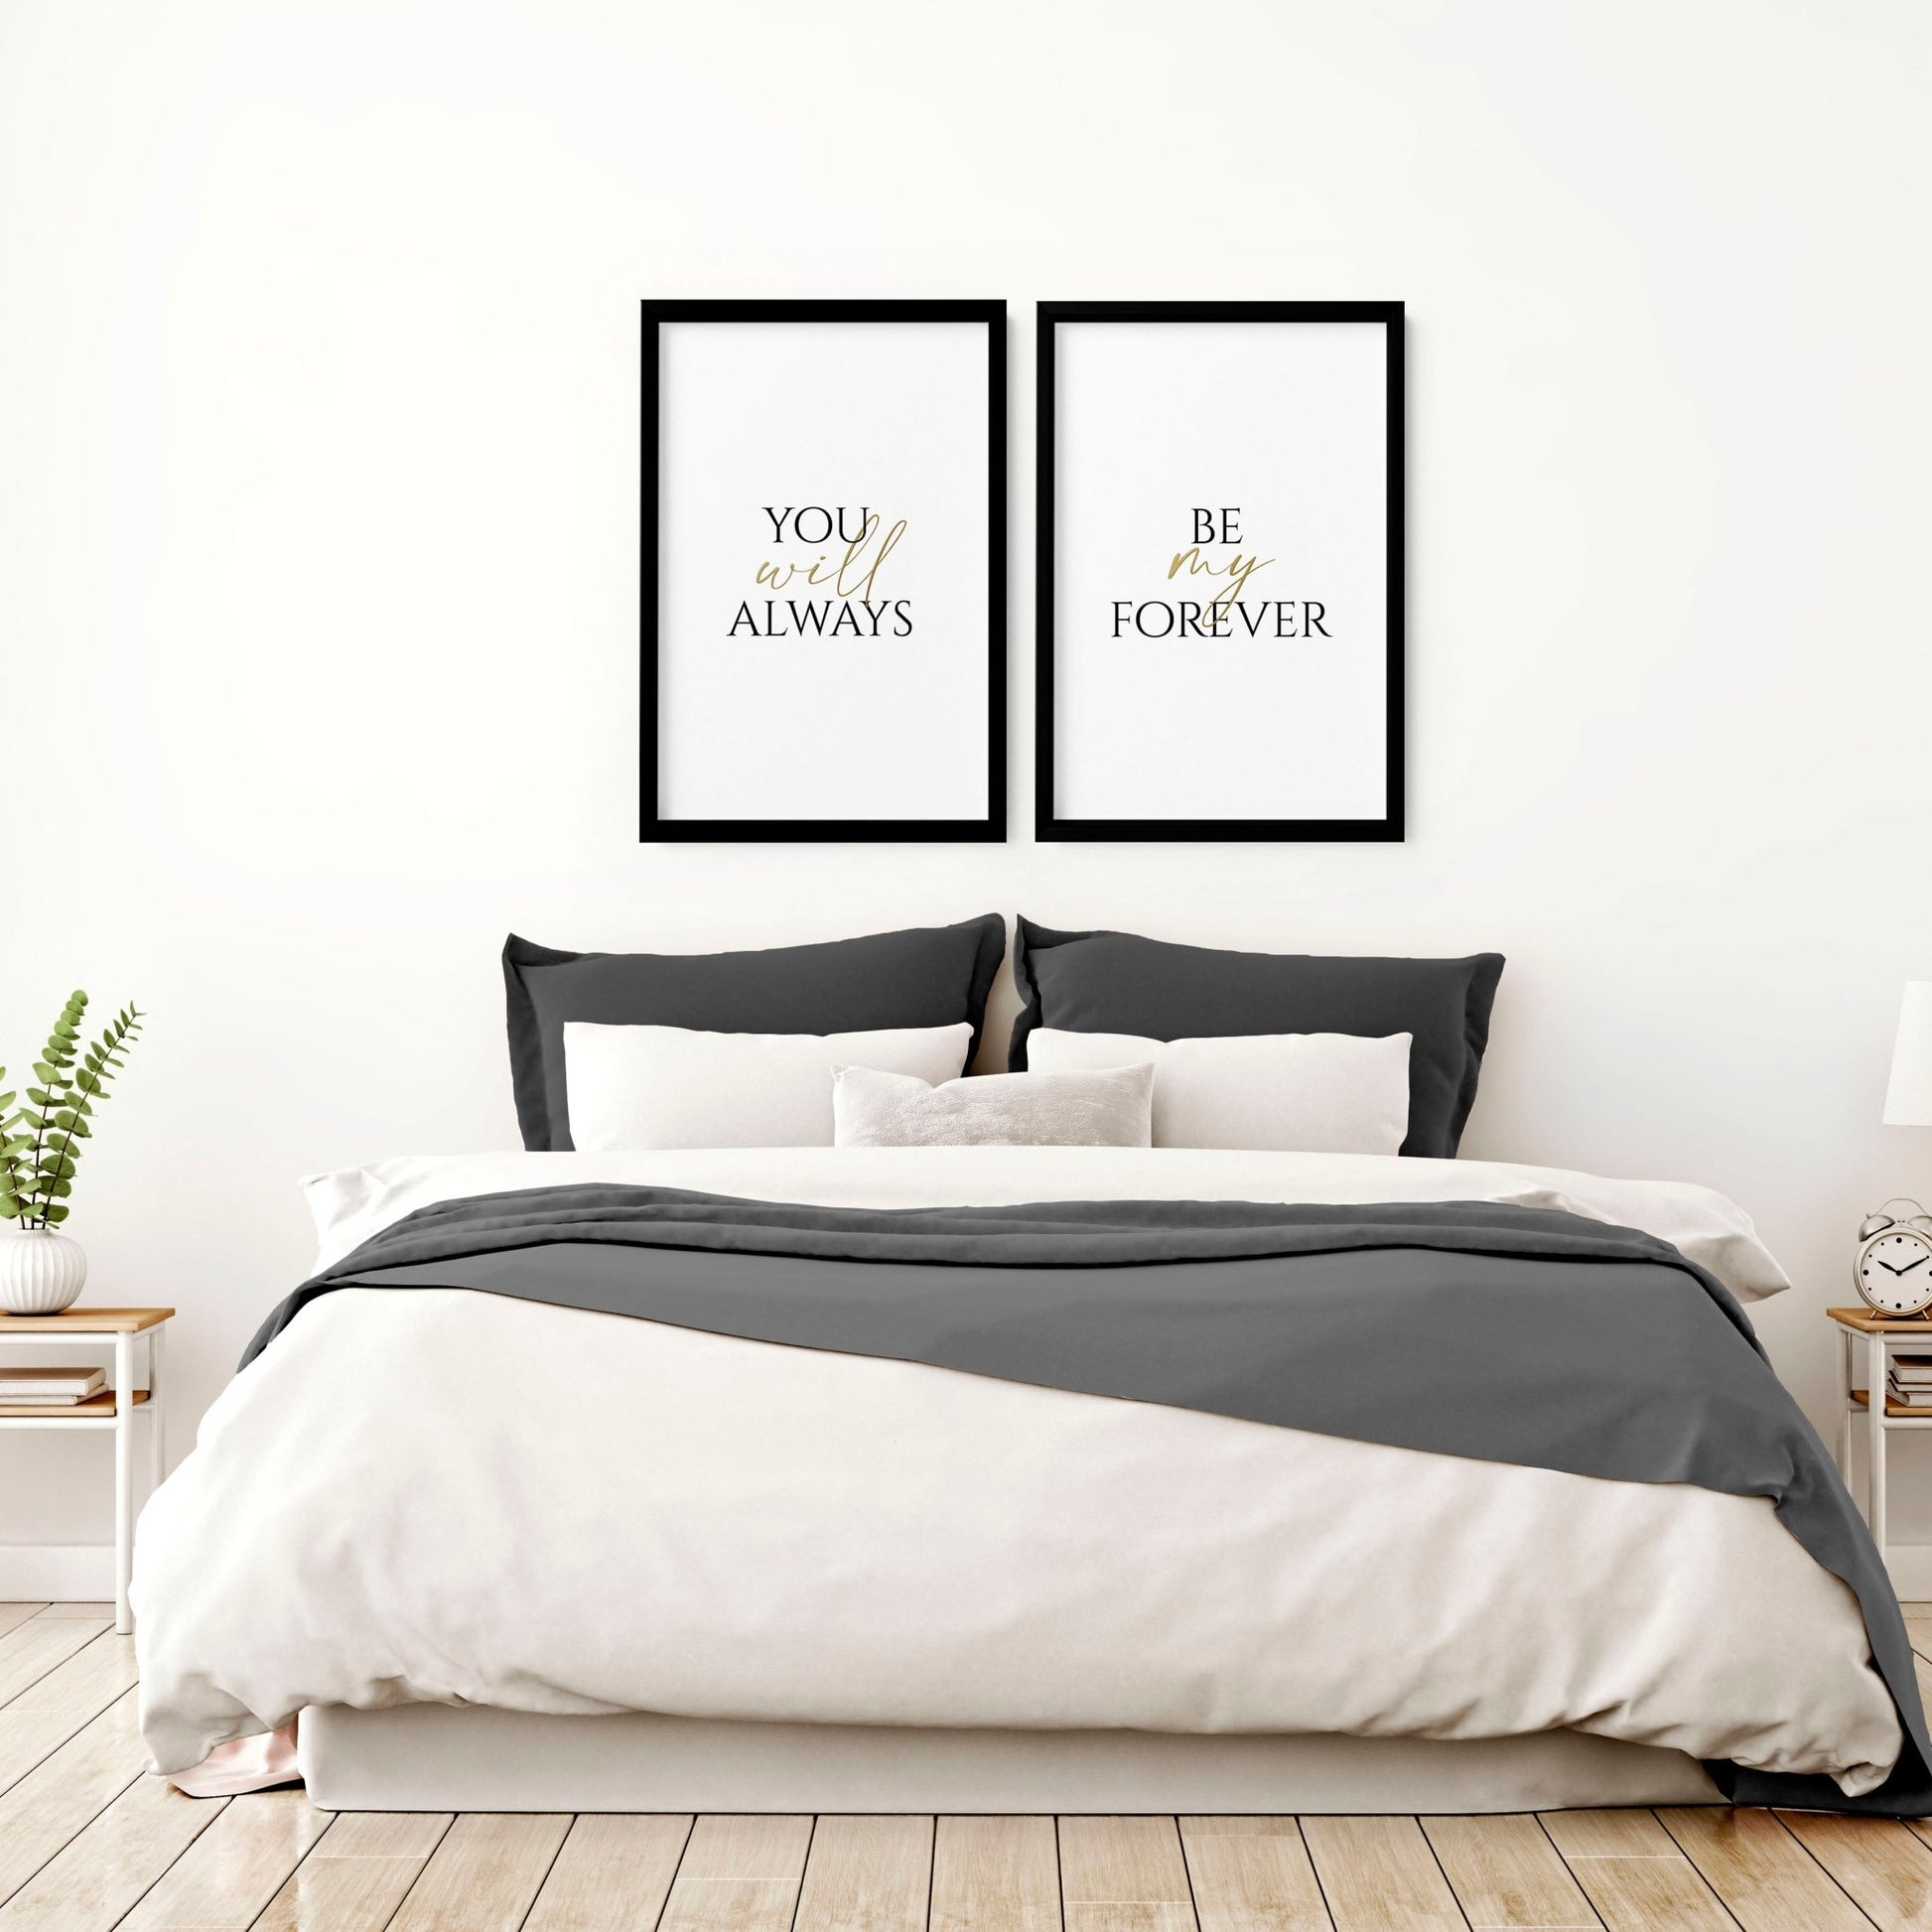 Gift idea for couples anniversary | set of 2 wall art prints for Bedroom - About Wall Art